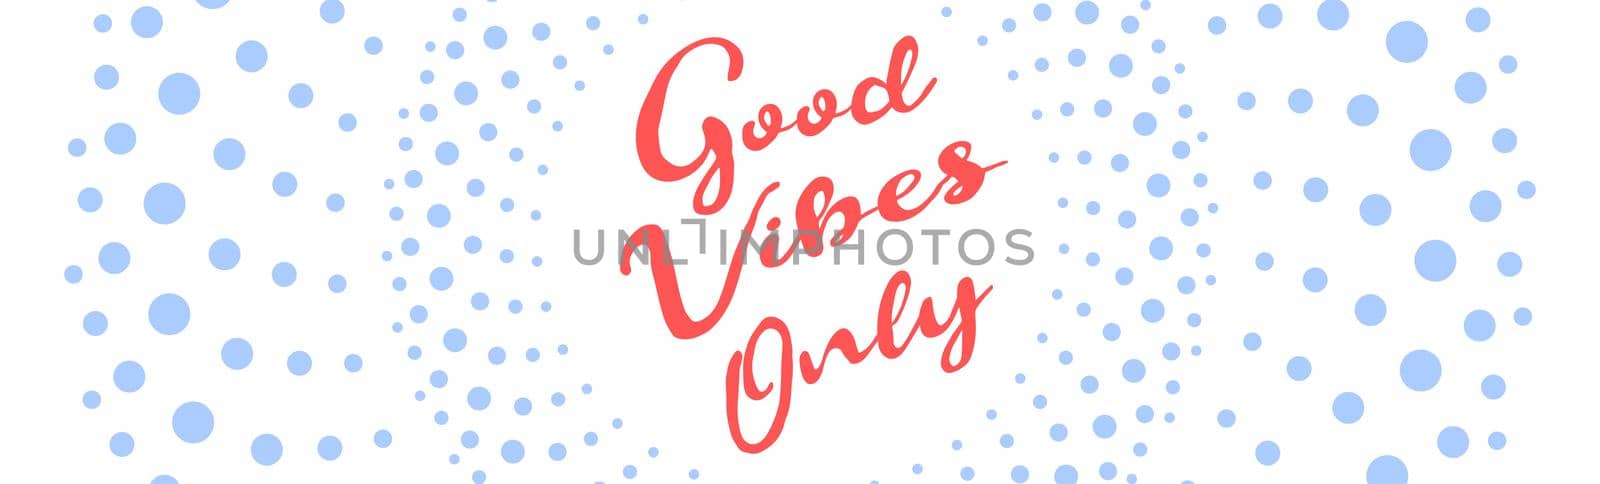 Good Vibes Only Text With Wavy Background. Motivational quote. Papercut design. Home decoration printable by mrceviz